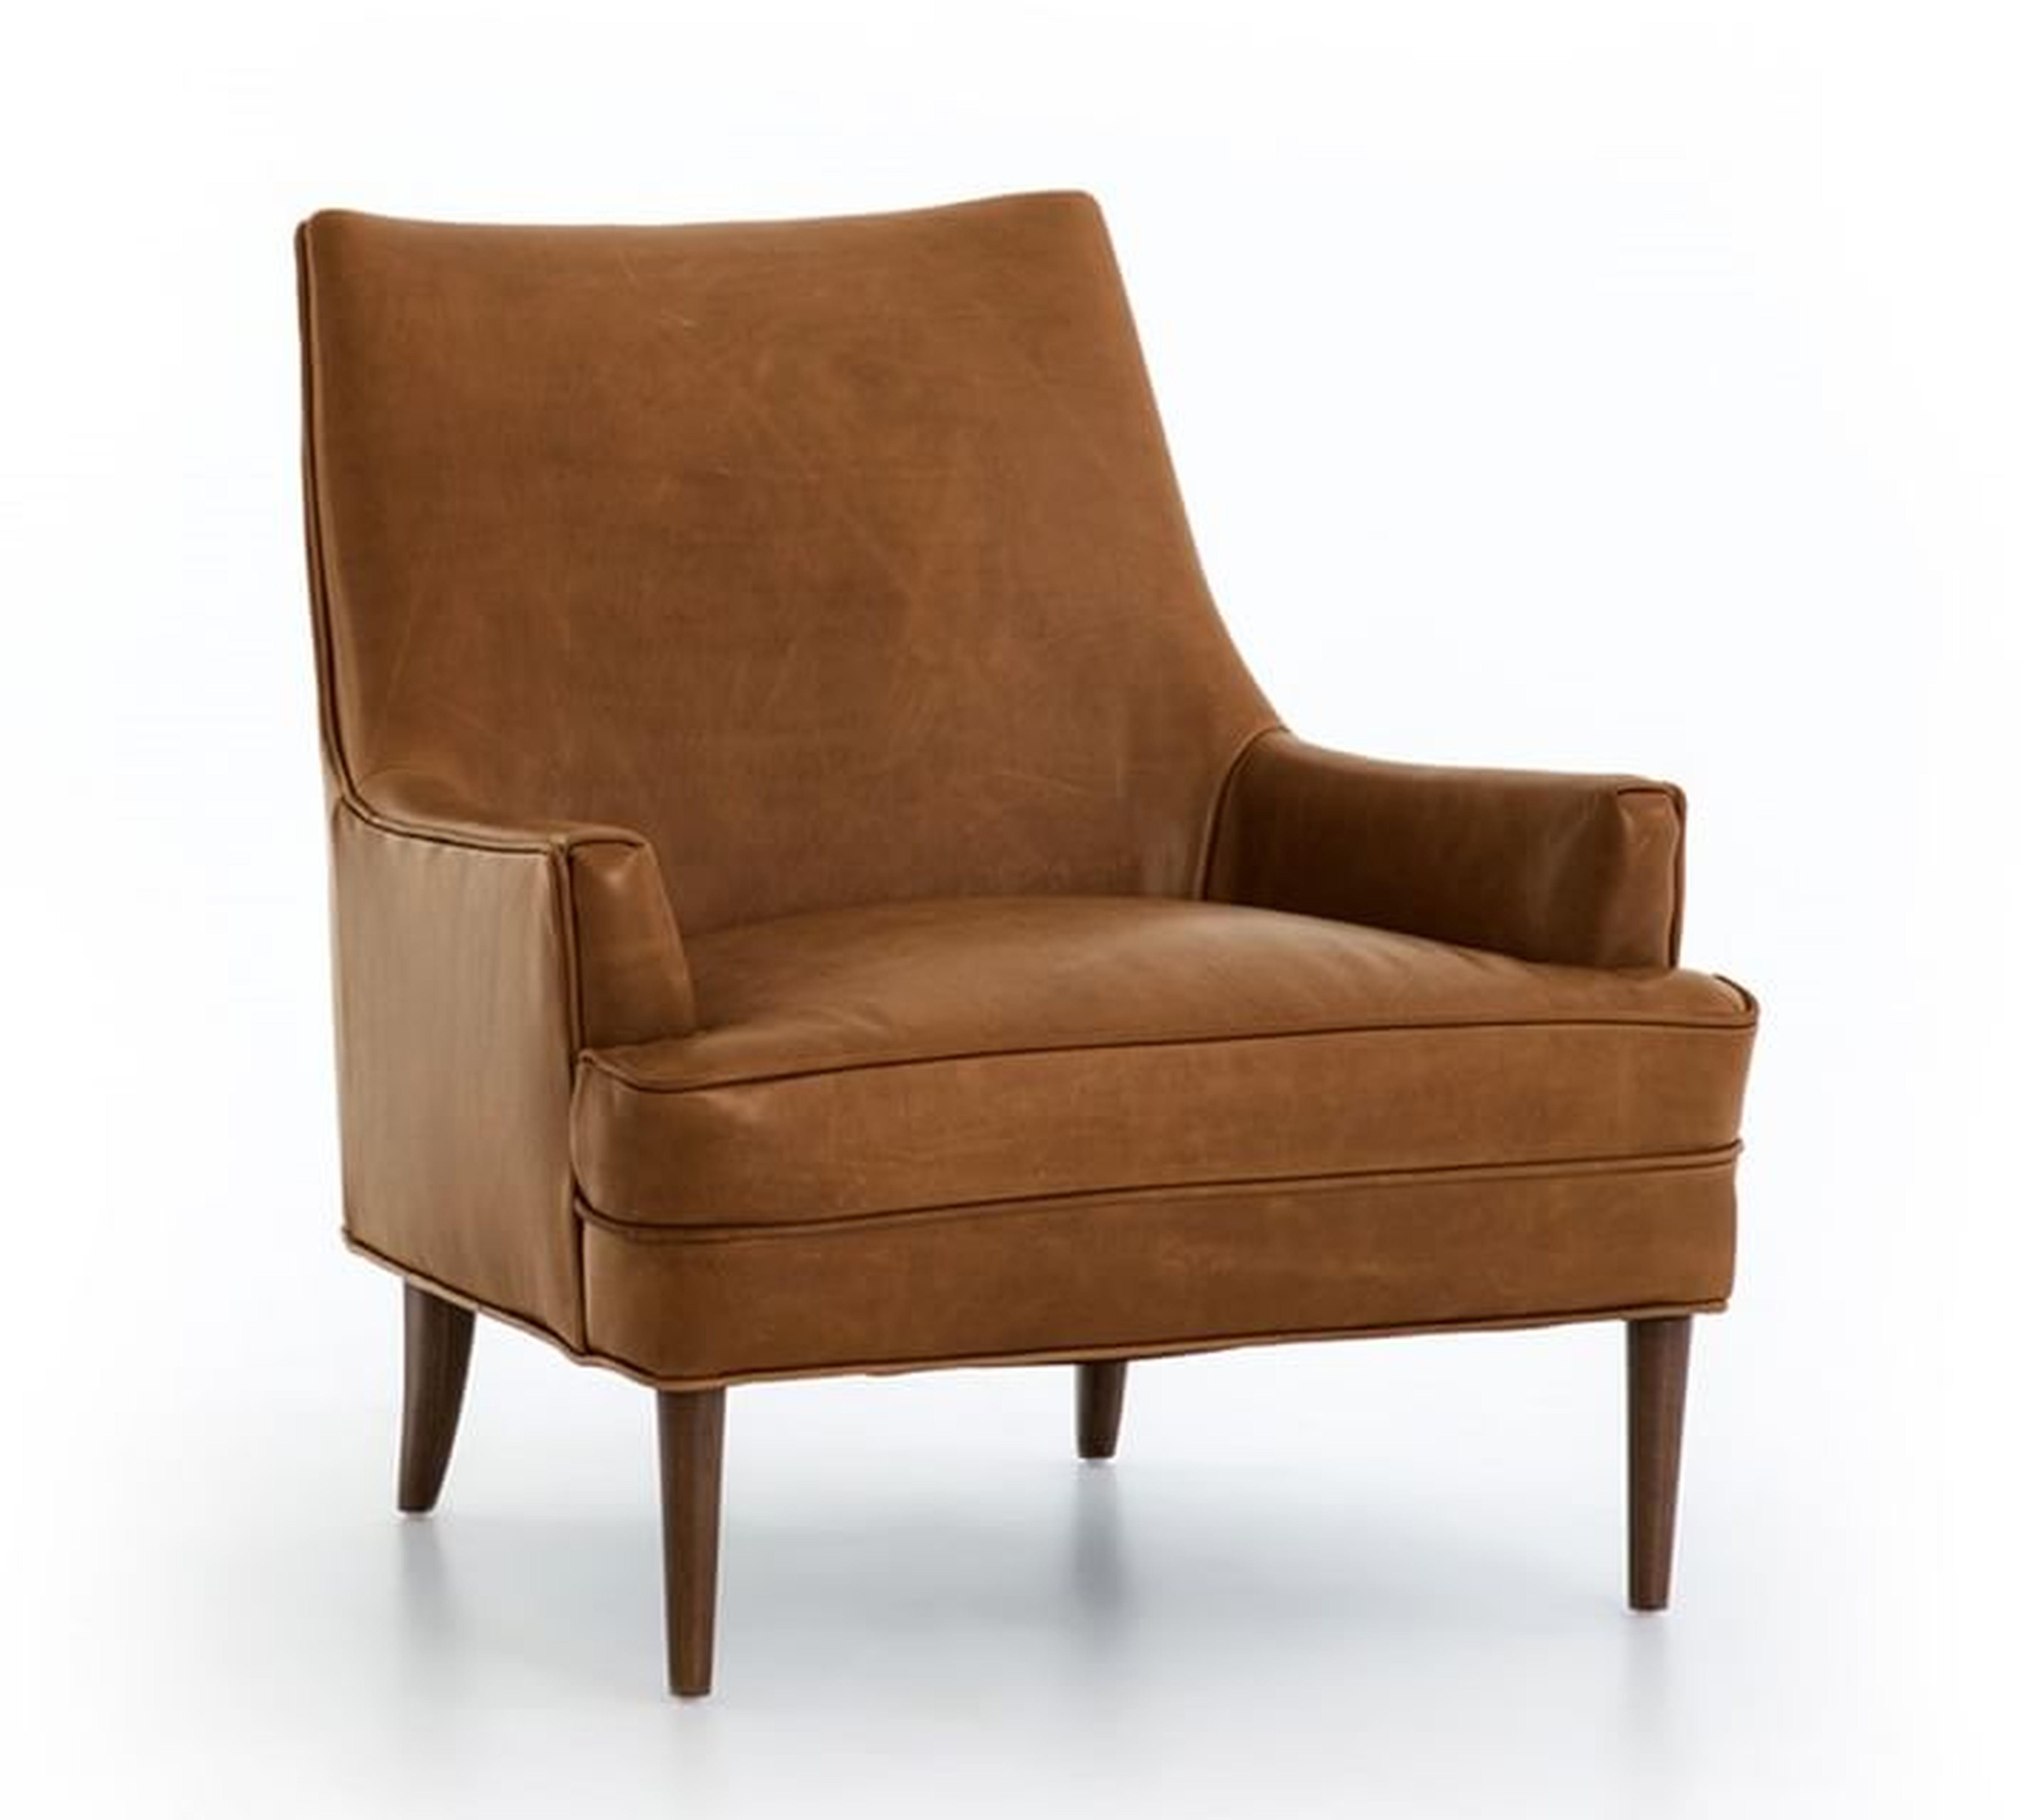 Reyes Leather Armchair, Polyester Wrapped Cushions, Statesville Caramel - Pottery Barn